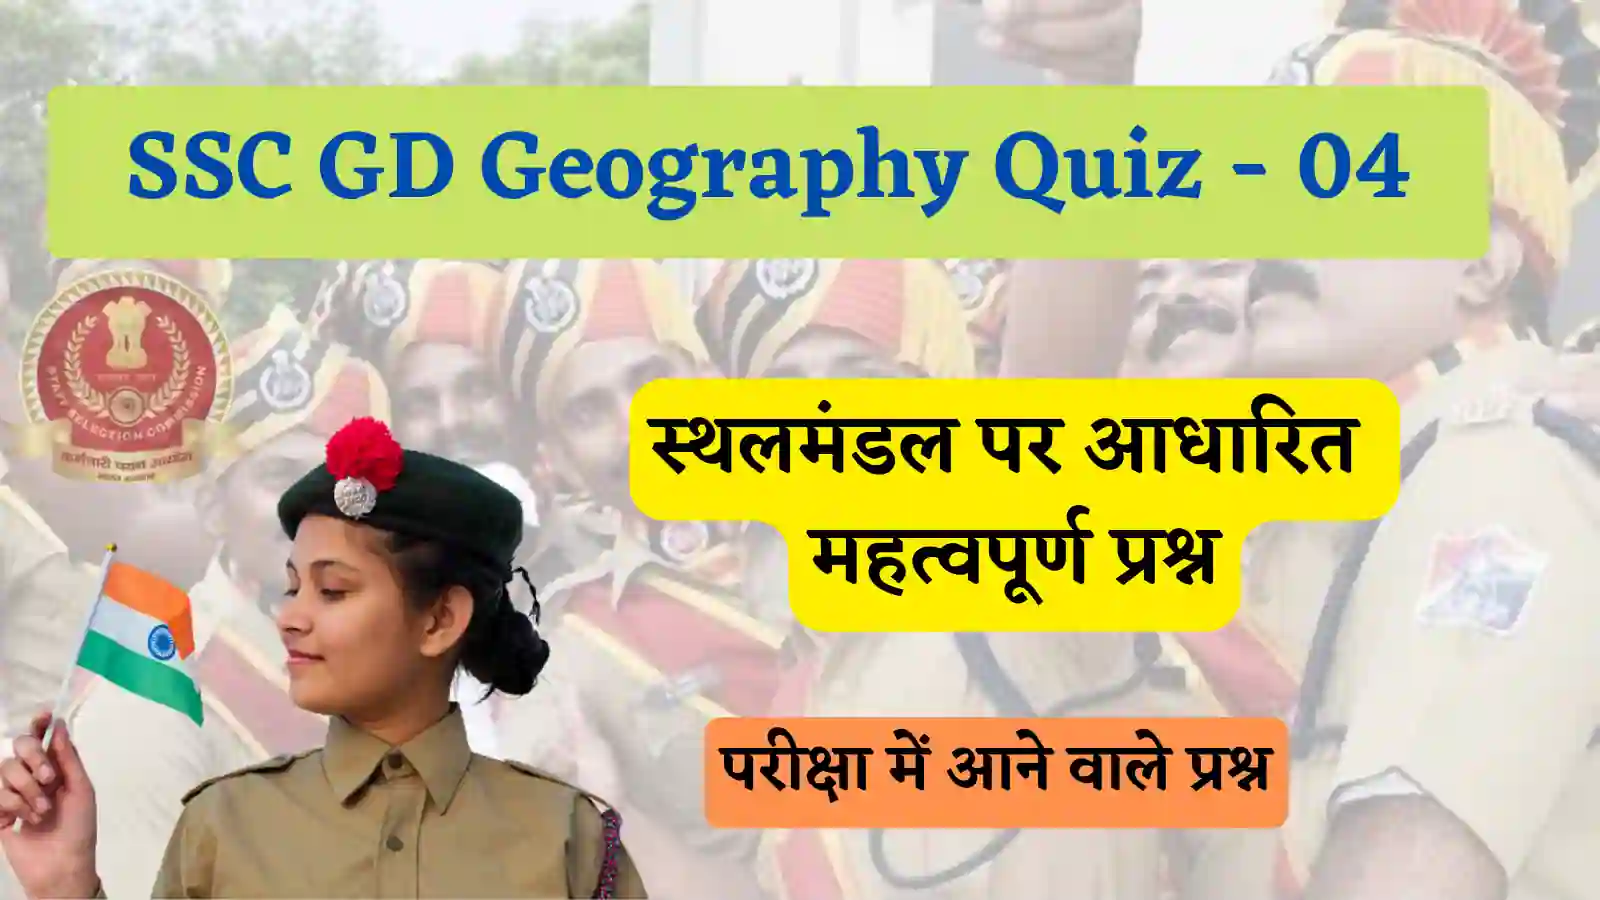 SSC GD Geography Quiz - 04